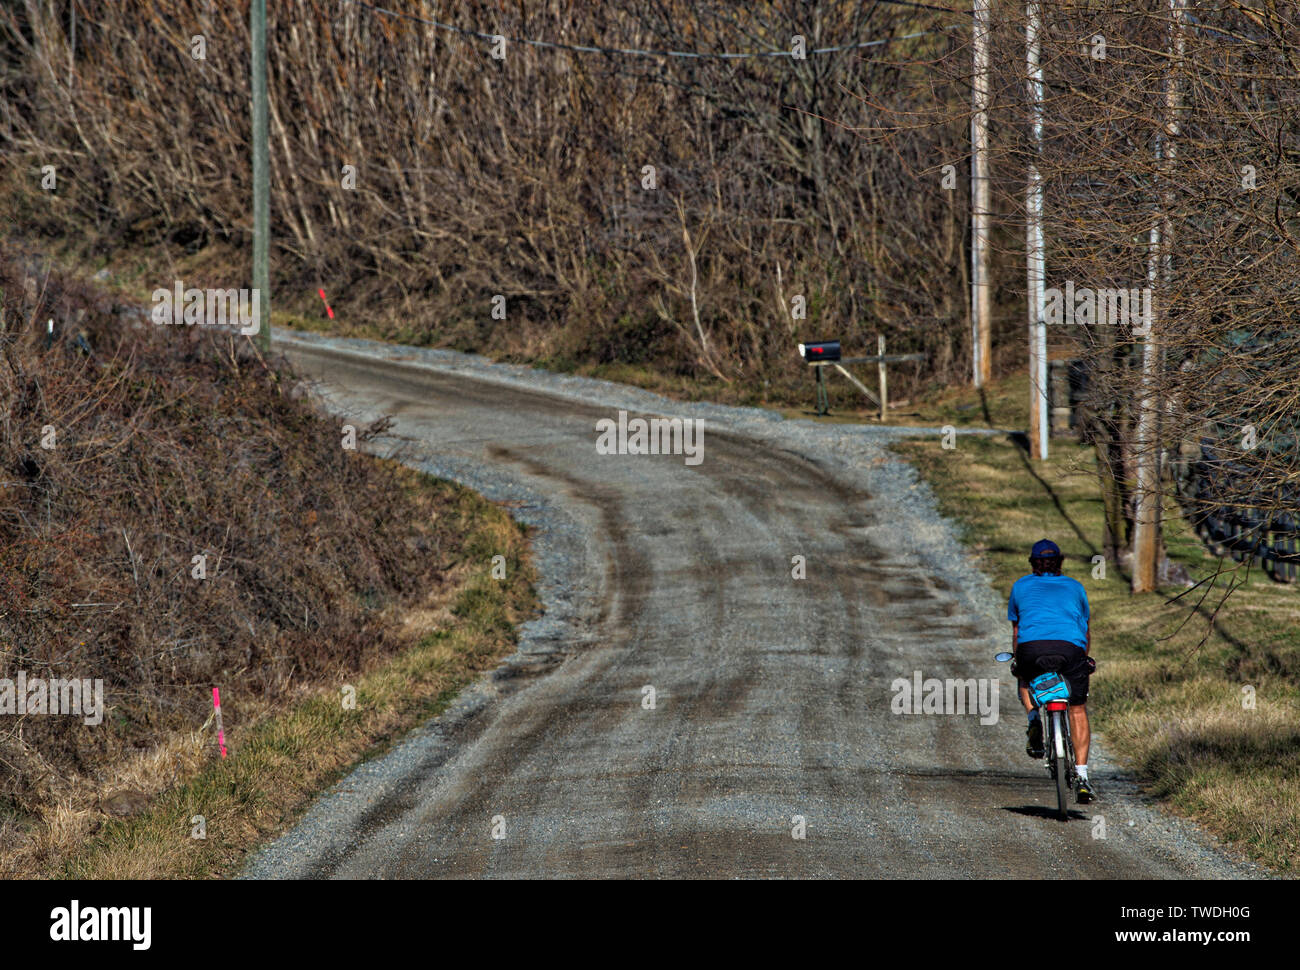 UNITED STATES - 02-20-2017: A cyclist enjoys a warm Presidents Day holiday with a ride along Williams Gap Road near Bluemont in Western Loudoun County Stock Photo